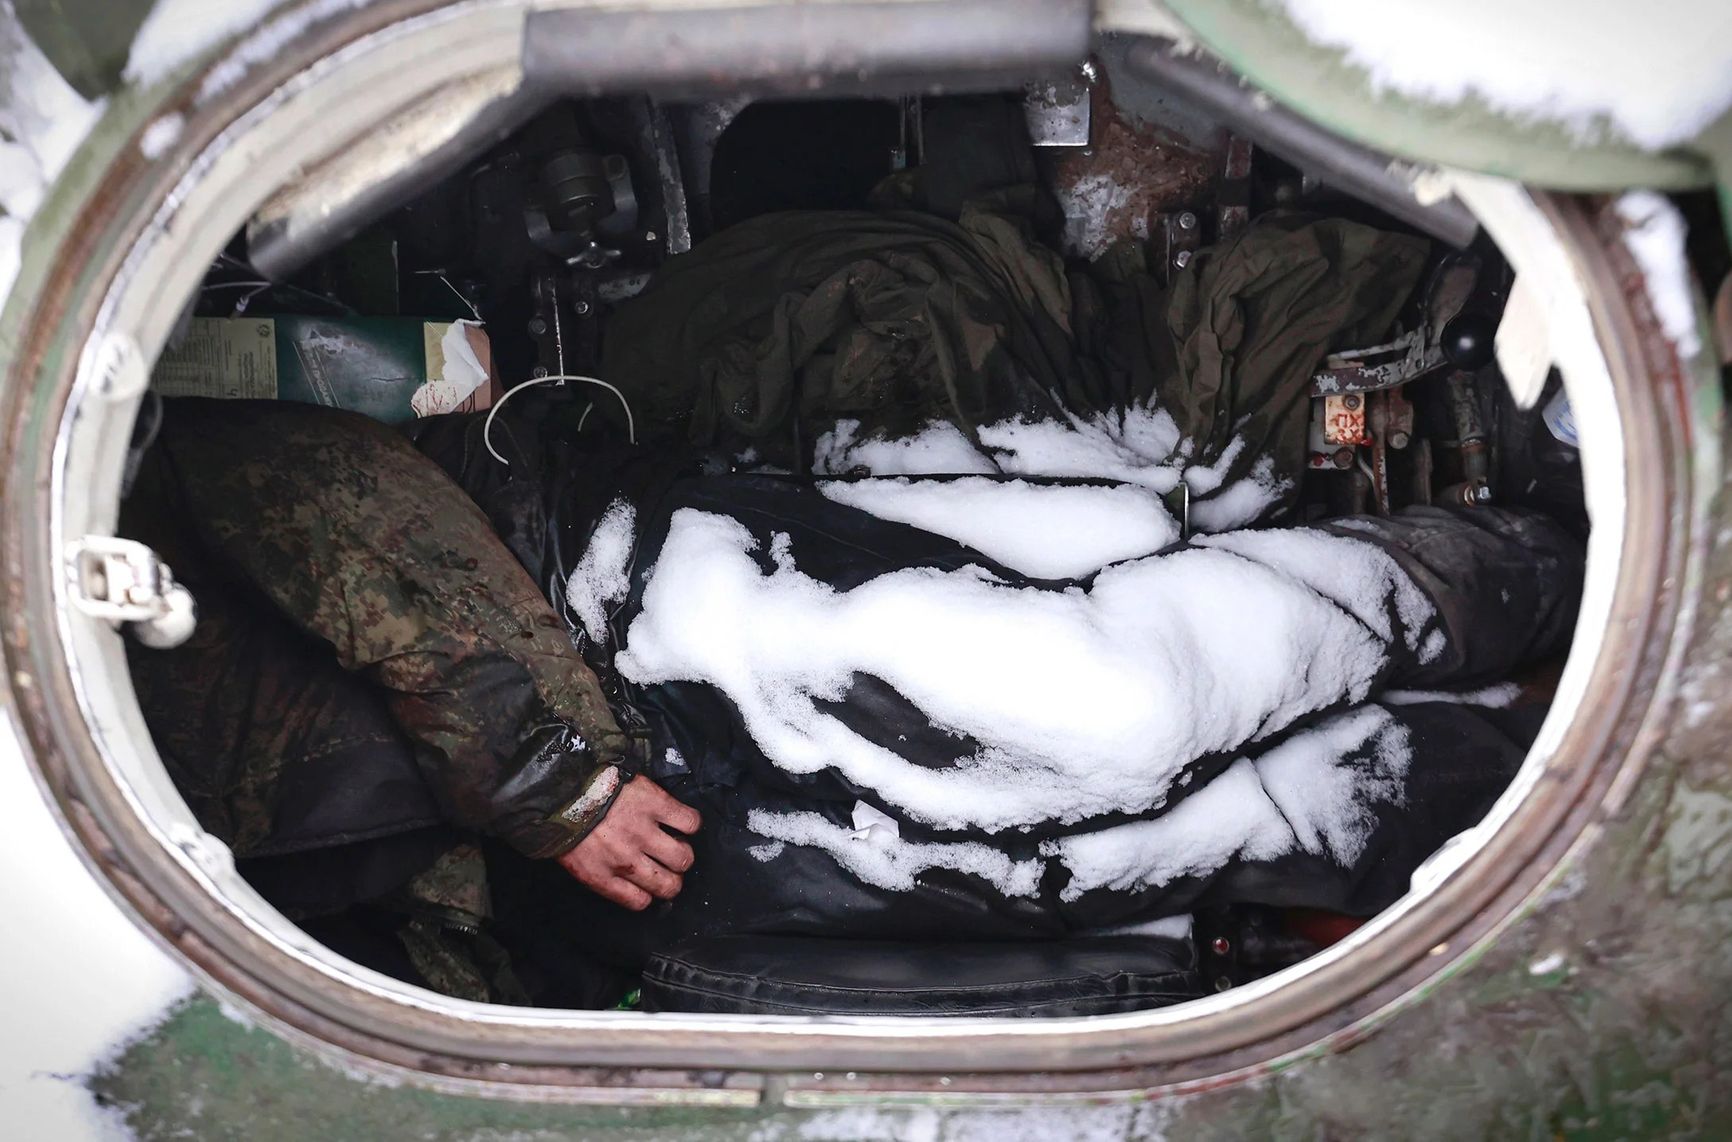 The dead bodies of soldiers are seen in a military vehicle on a road in the town of Bucha, close to the capital Kyiv, Ukraine, on March 1.